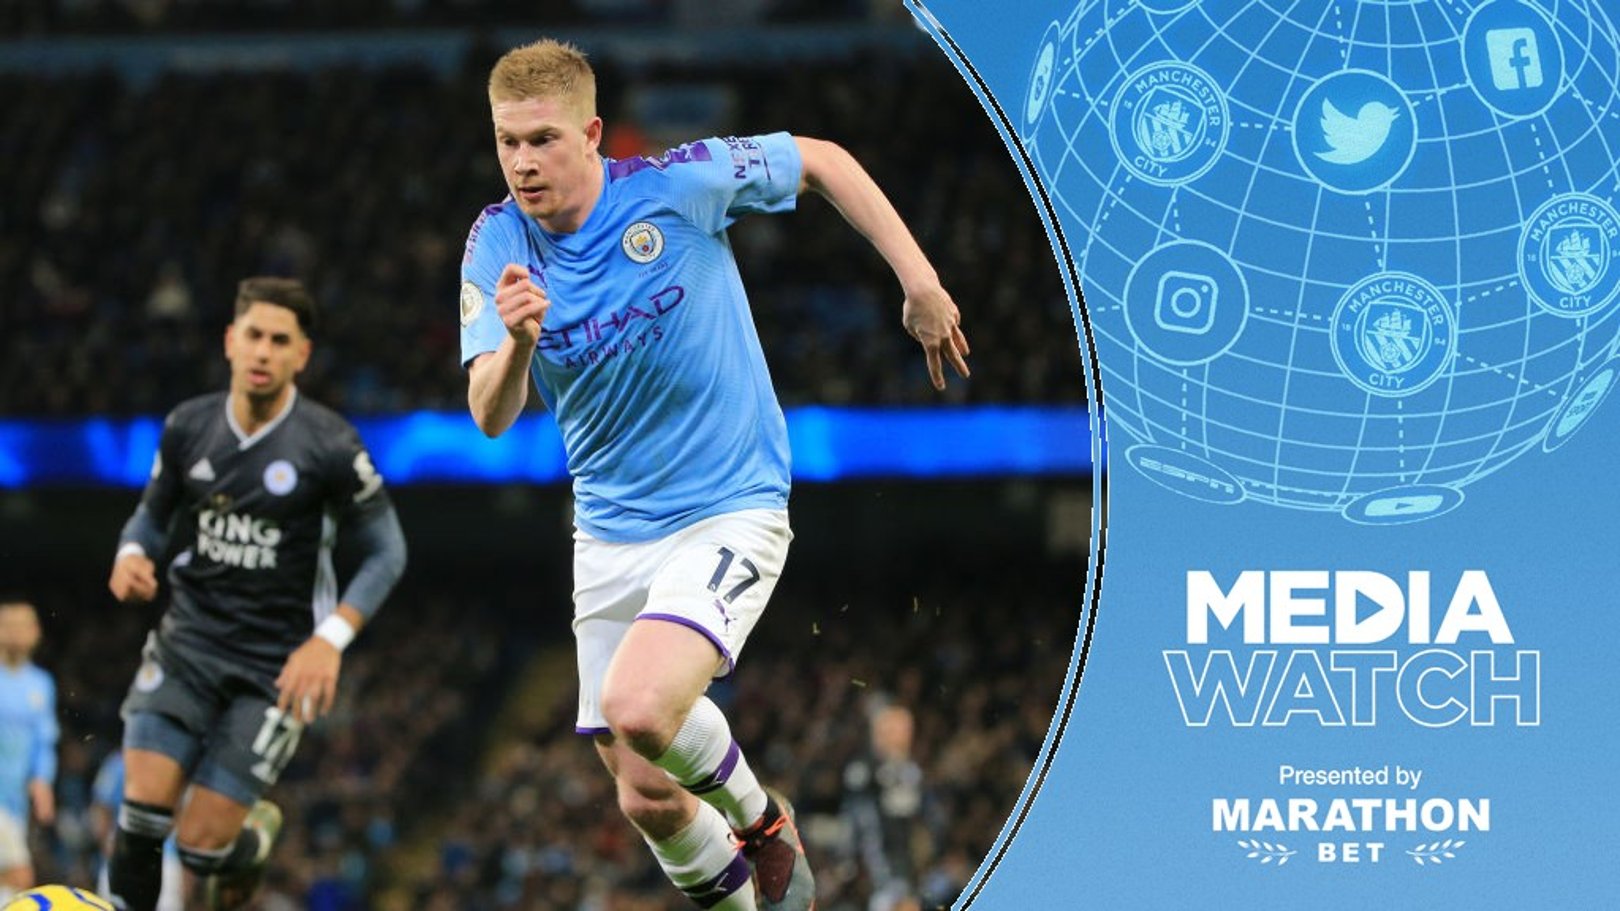 Media Watch: De Bruyne tipped for top award